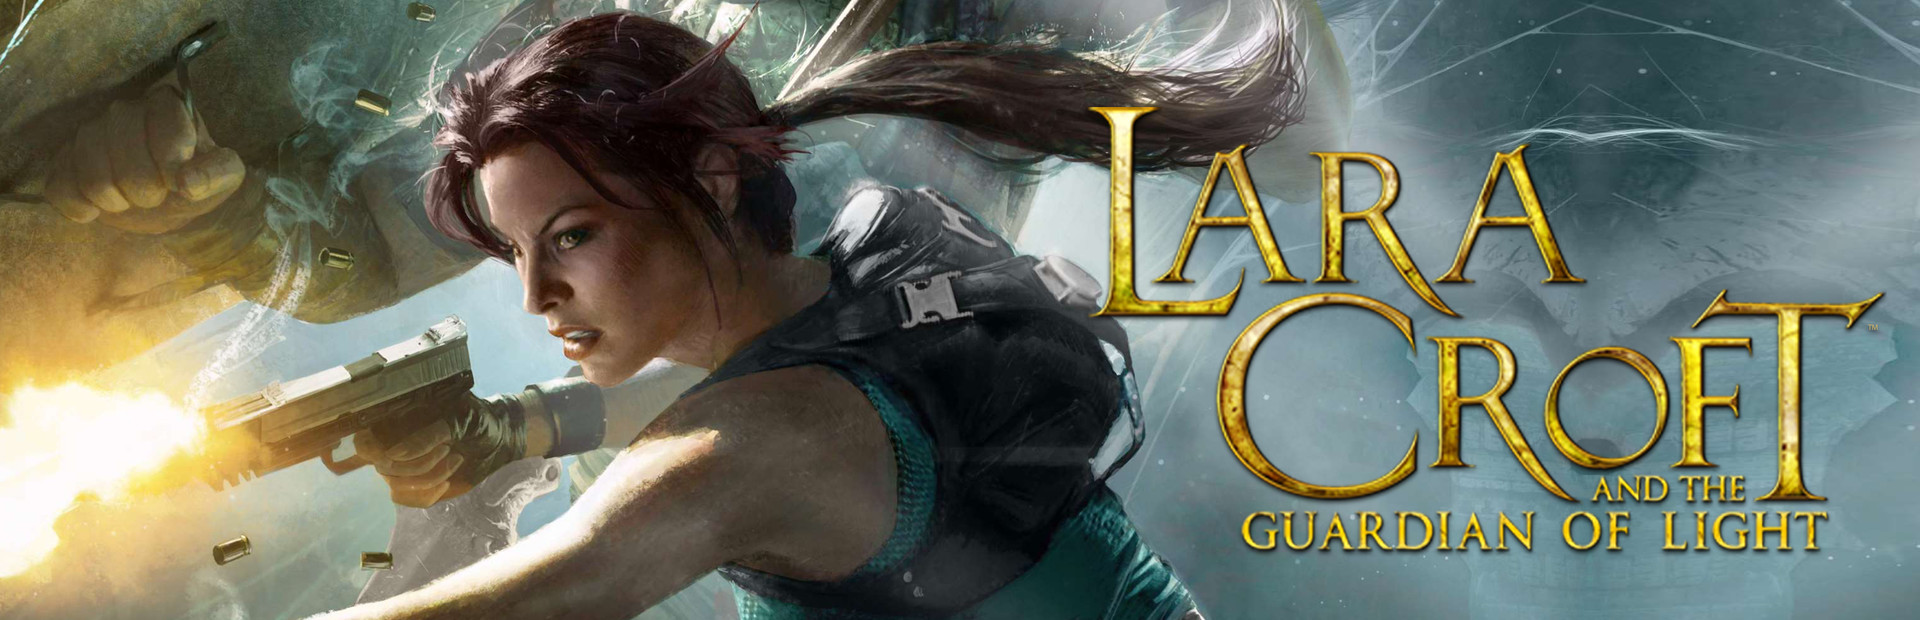 Lara Croft and the Guardian of Light cover image